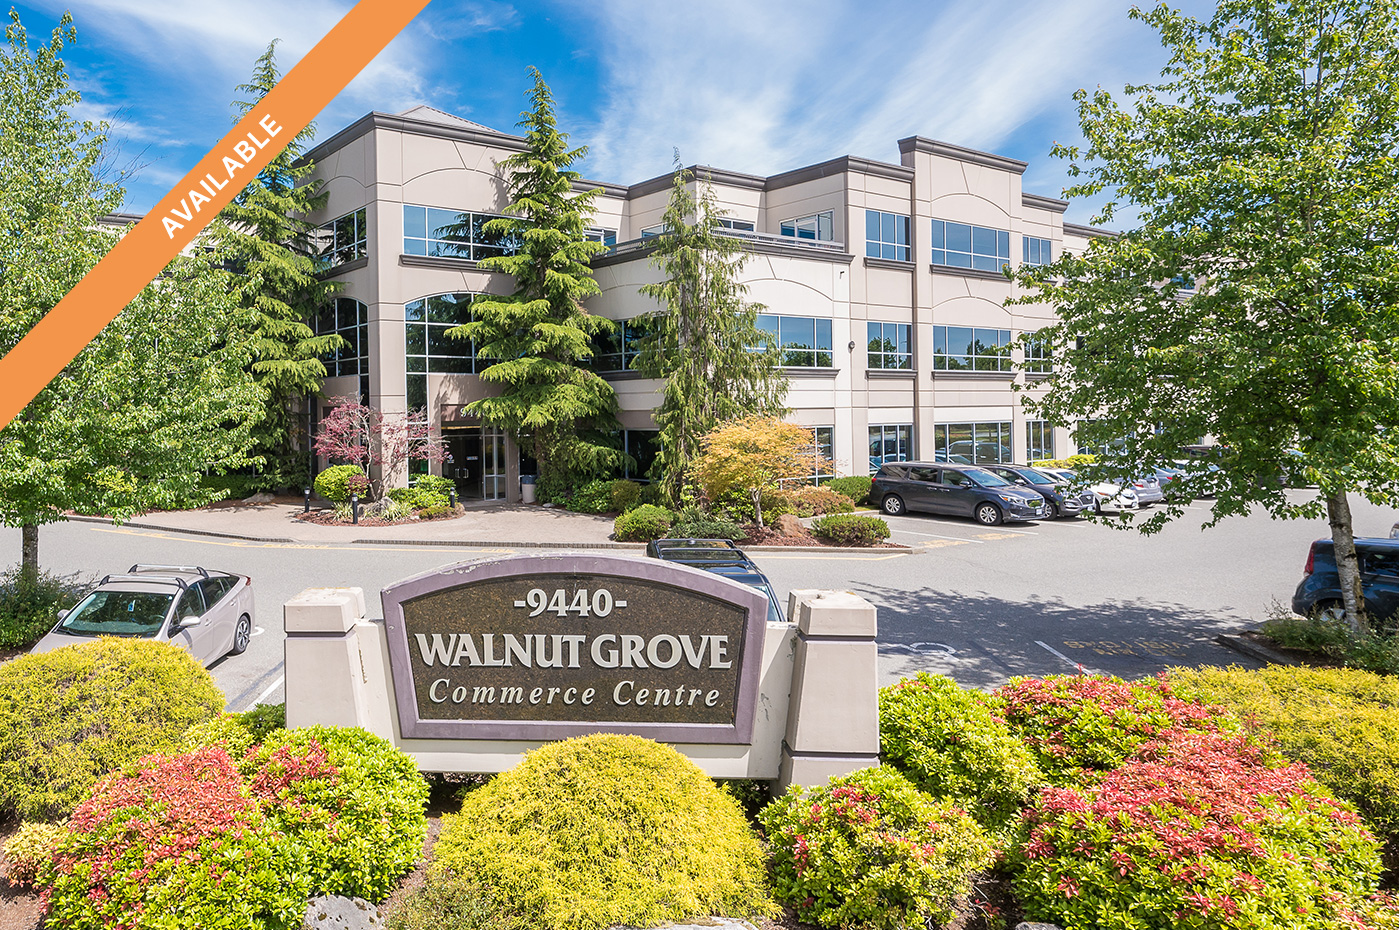 Walnut Grove Commerce Centre: Units Available